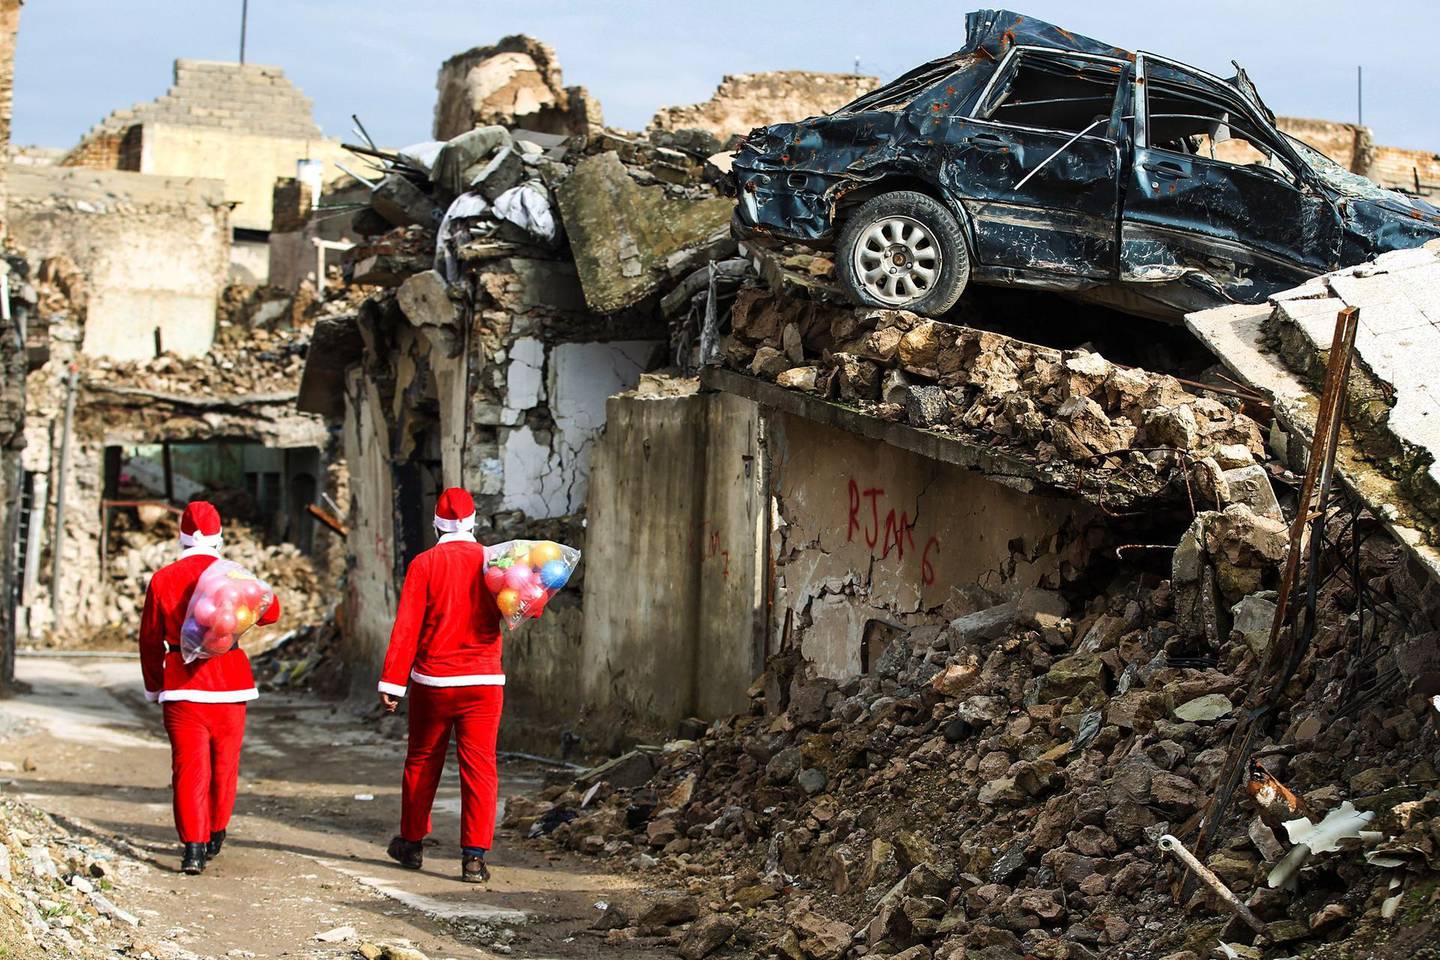 TOPSHOT - Iraqi youths dressed in Father Christmas suits walk through the streets of the old city of Mosul as they distribute gifts, on December 26, 2018. Iraq on December 10 marked the first anniversary since declaring victory in its three-year war against the Islamic State (IS) group, which had left the country's former second city and the jihadists' capital in ruin. / AFP / AHMAD AL-RUBAYE
